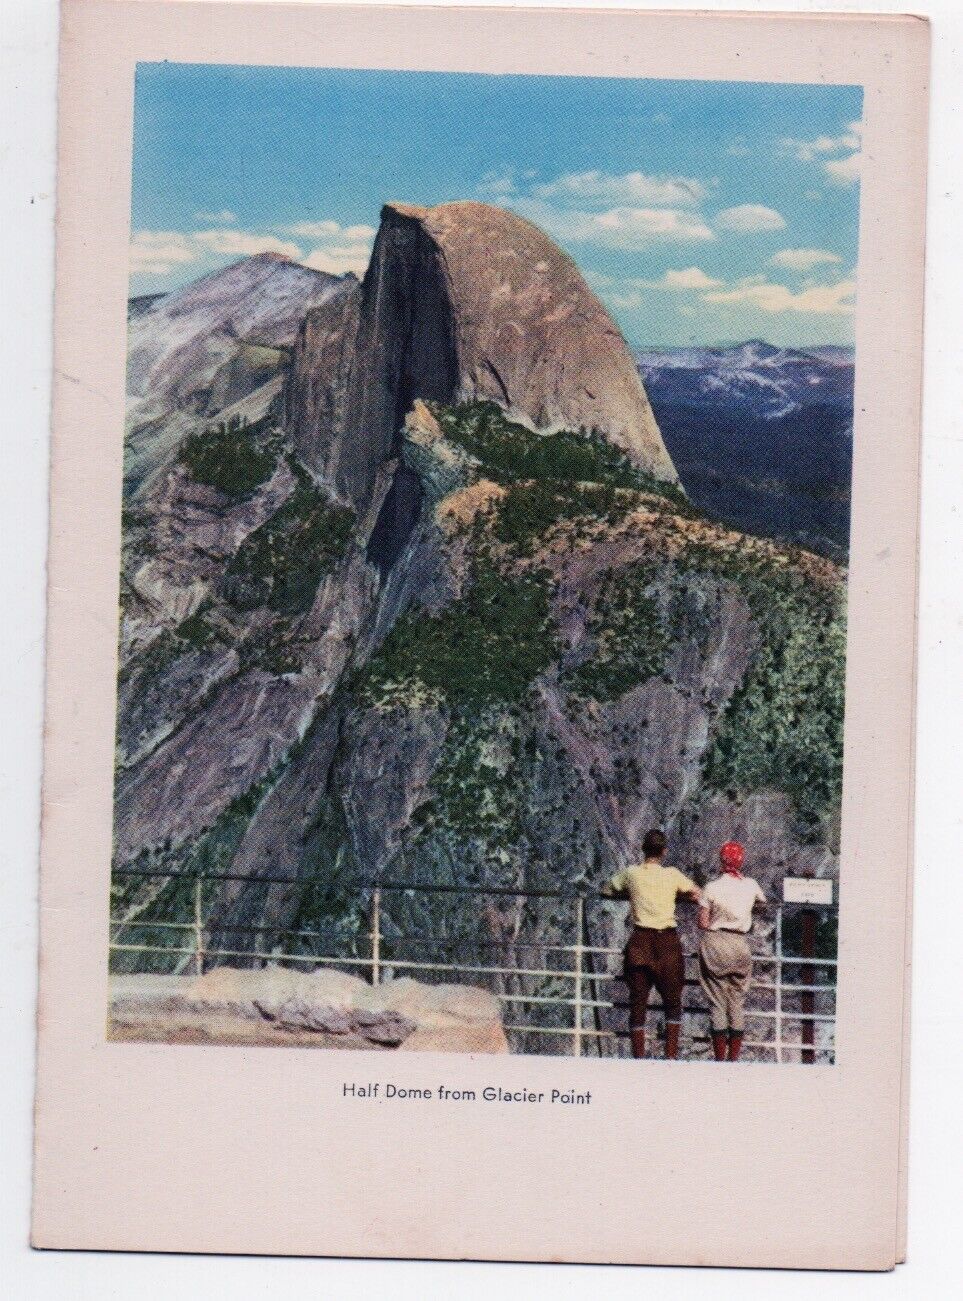 1948 Camp Curry Yosemite National Park Breakfast Menu showing Half Dome